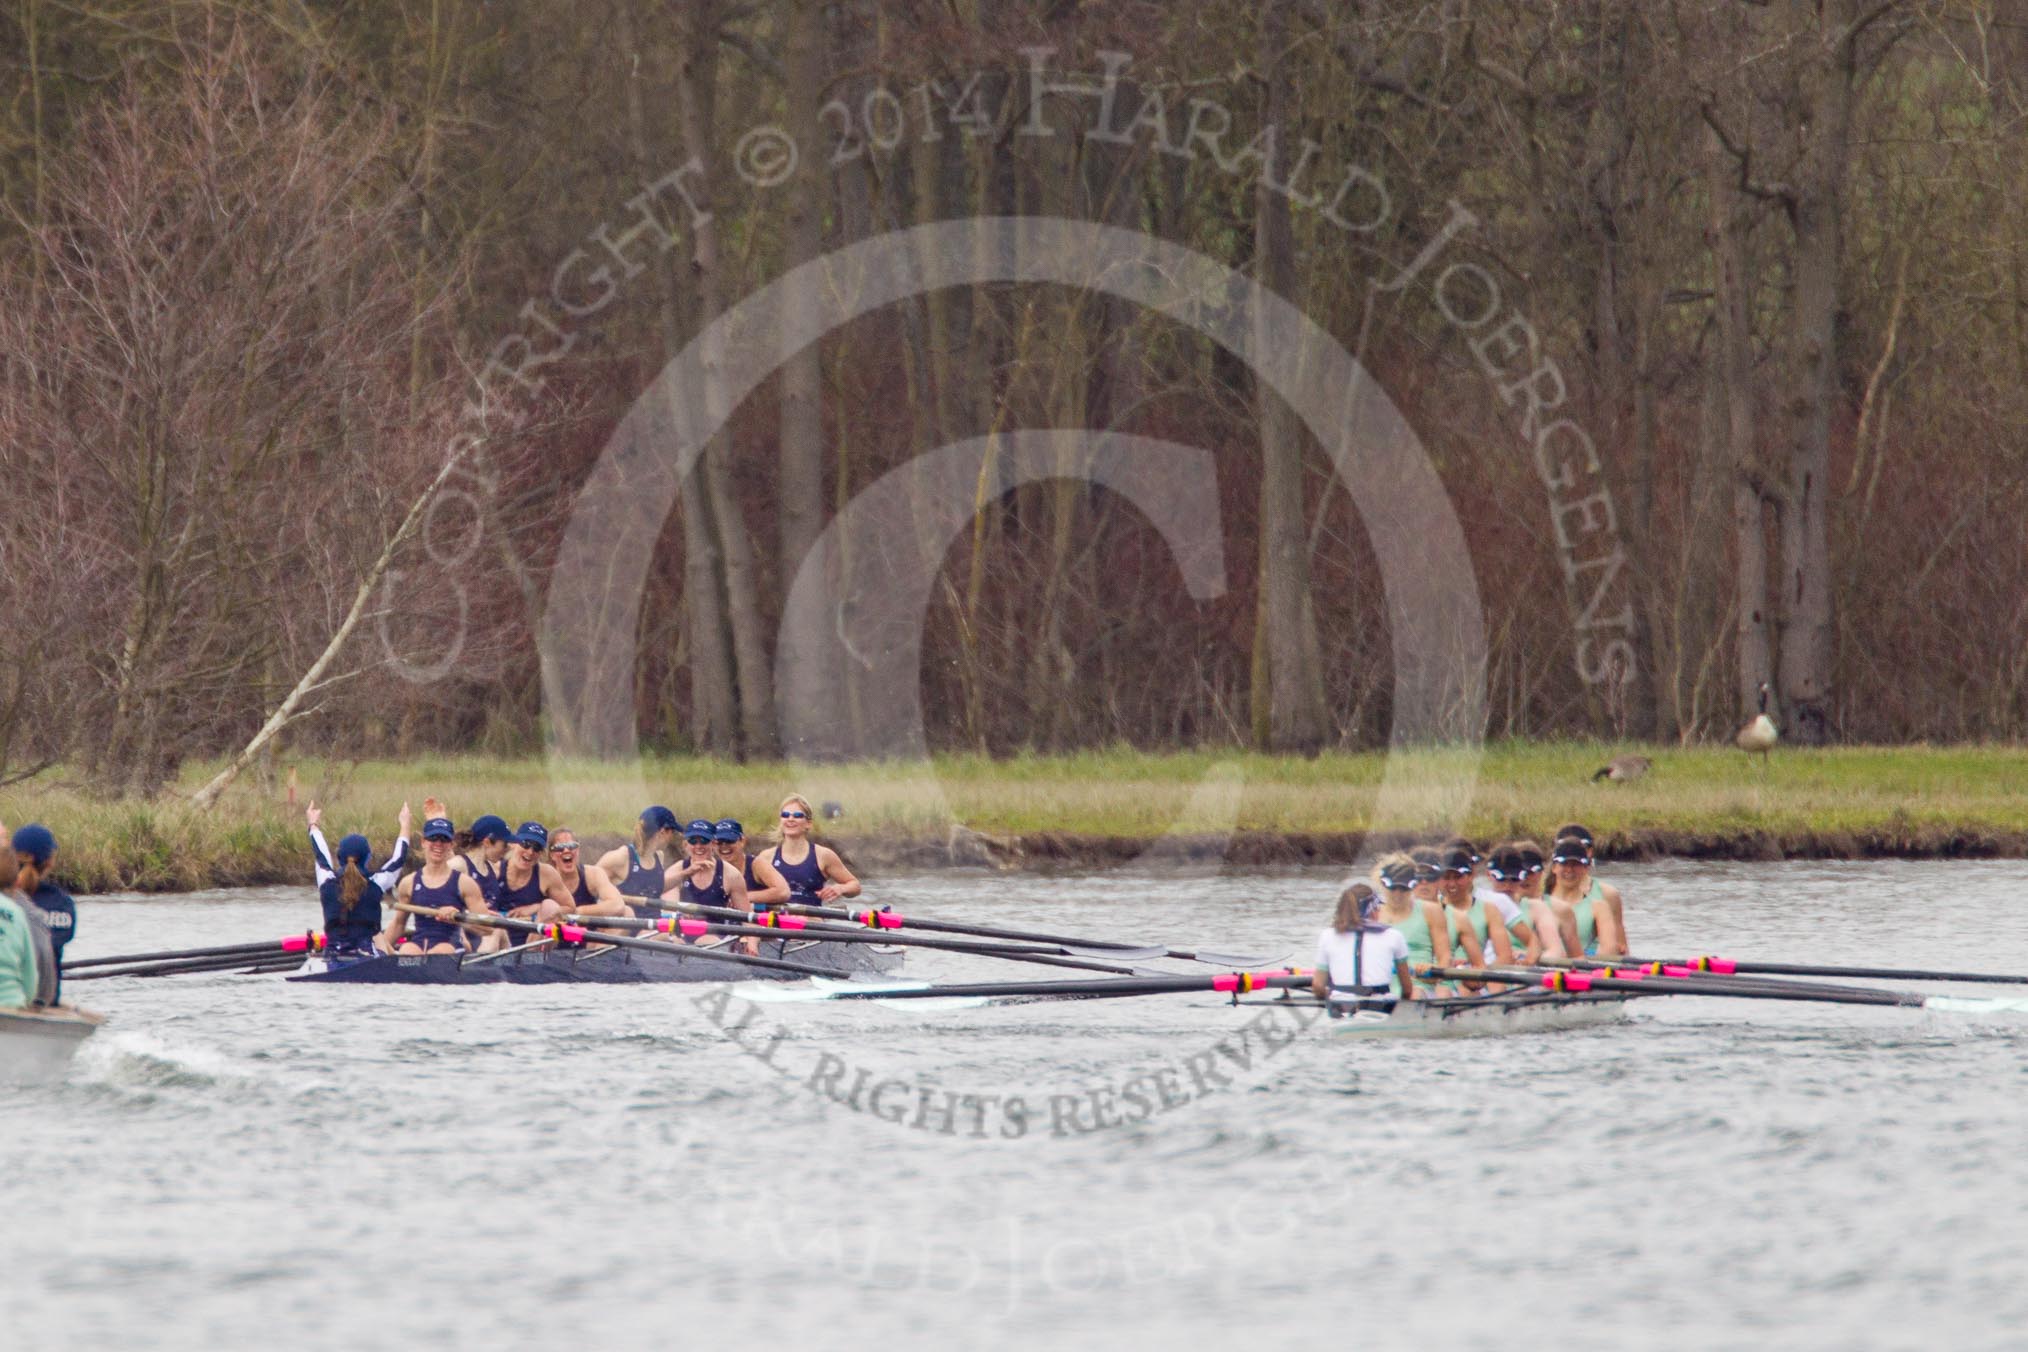 The Women's Boat Race and Henley Boat Races 2014: The Lightweight Women's Boat Race - OUWLRC and CUWBC Lightweights after passing the finish line..
River Thames,
Henley-on-Thames,
Buckinghamshire,
United Kingdom,
on 30 March 2014 at 14:50, image #251